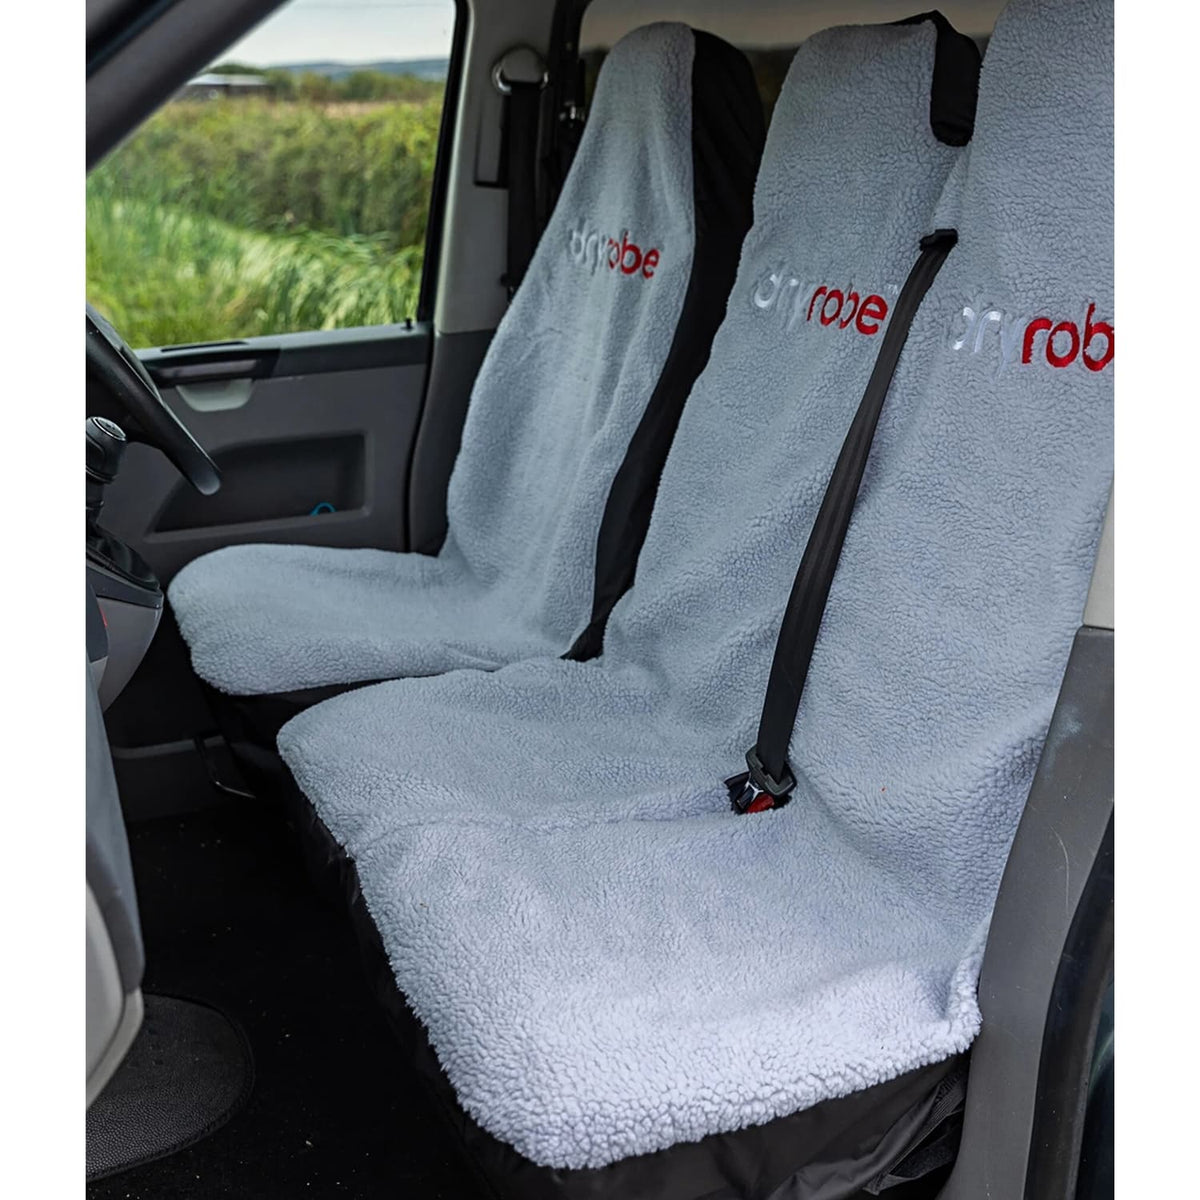 Dryrobe Double Car Seat Cover - Black Grey - Gifts for Surfers by Dryrobe